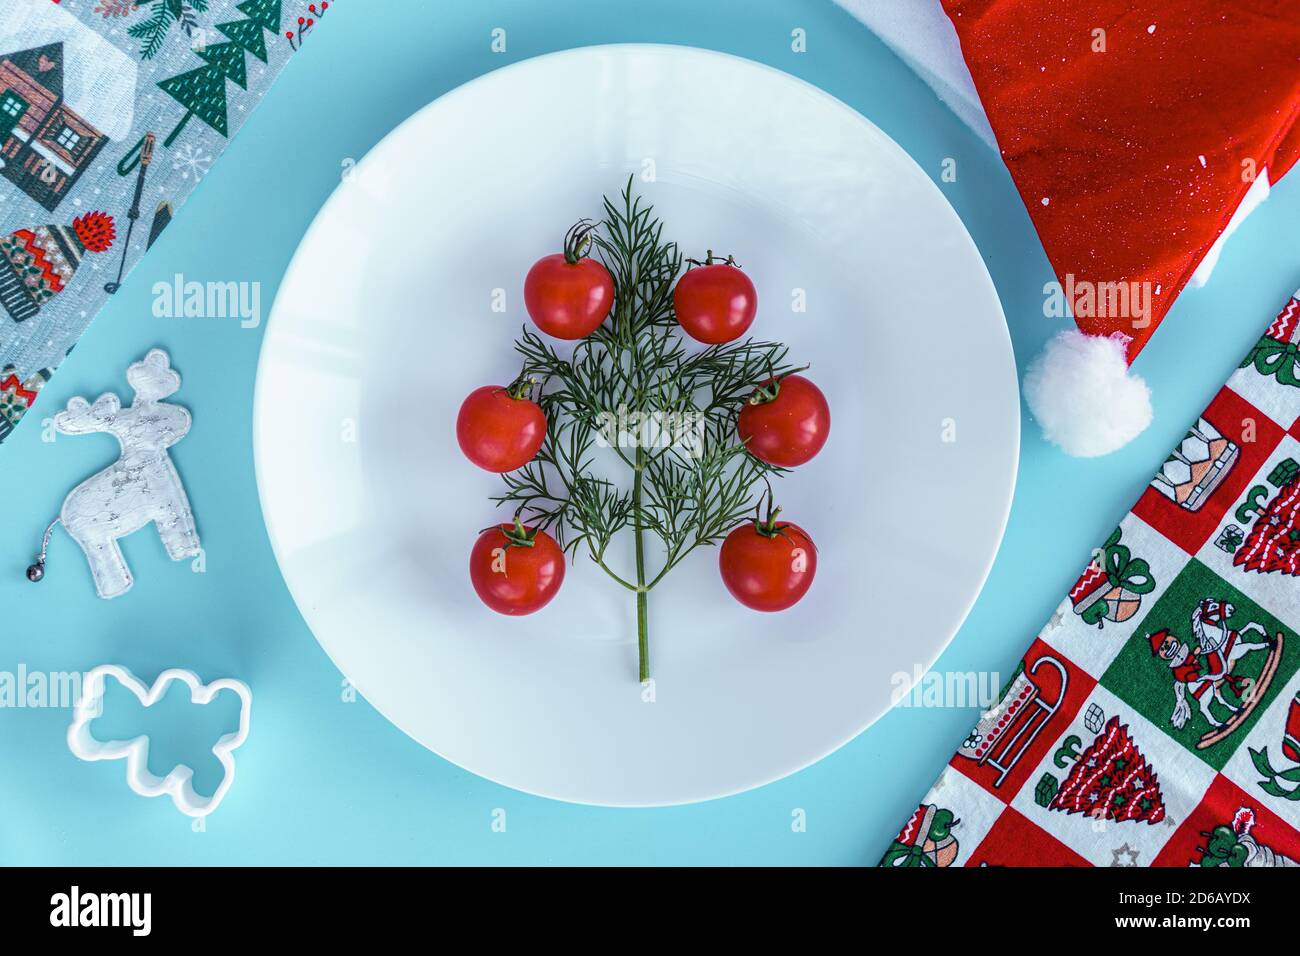 Xmas, winter, new year concept - layout white plate on which there are Christmas tree dill tree decorated with red cherry tomatoes in a triangle shape Stock Photo